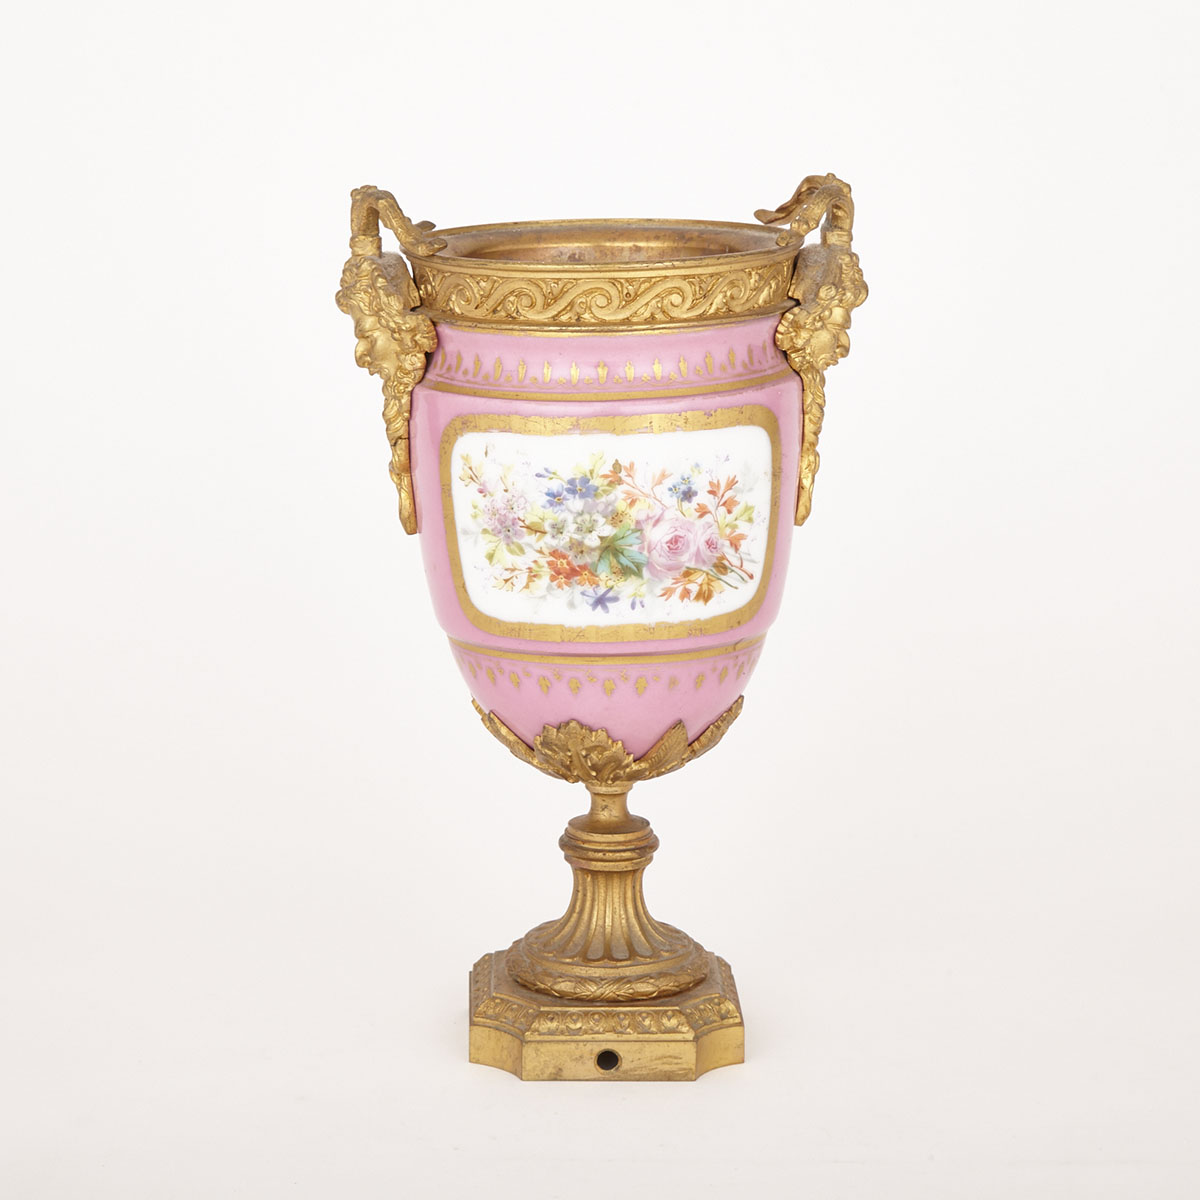 Ormolu Mounted French Porcelain Sèvres-Style Pink Ground Vase, late 19th century